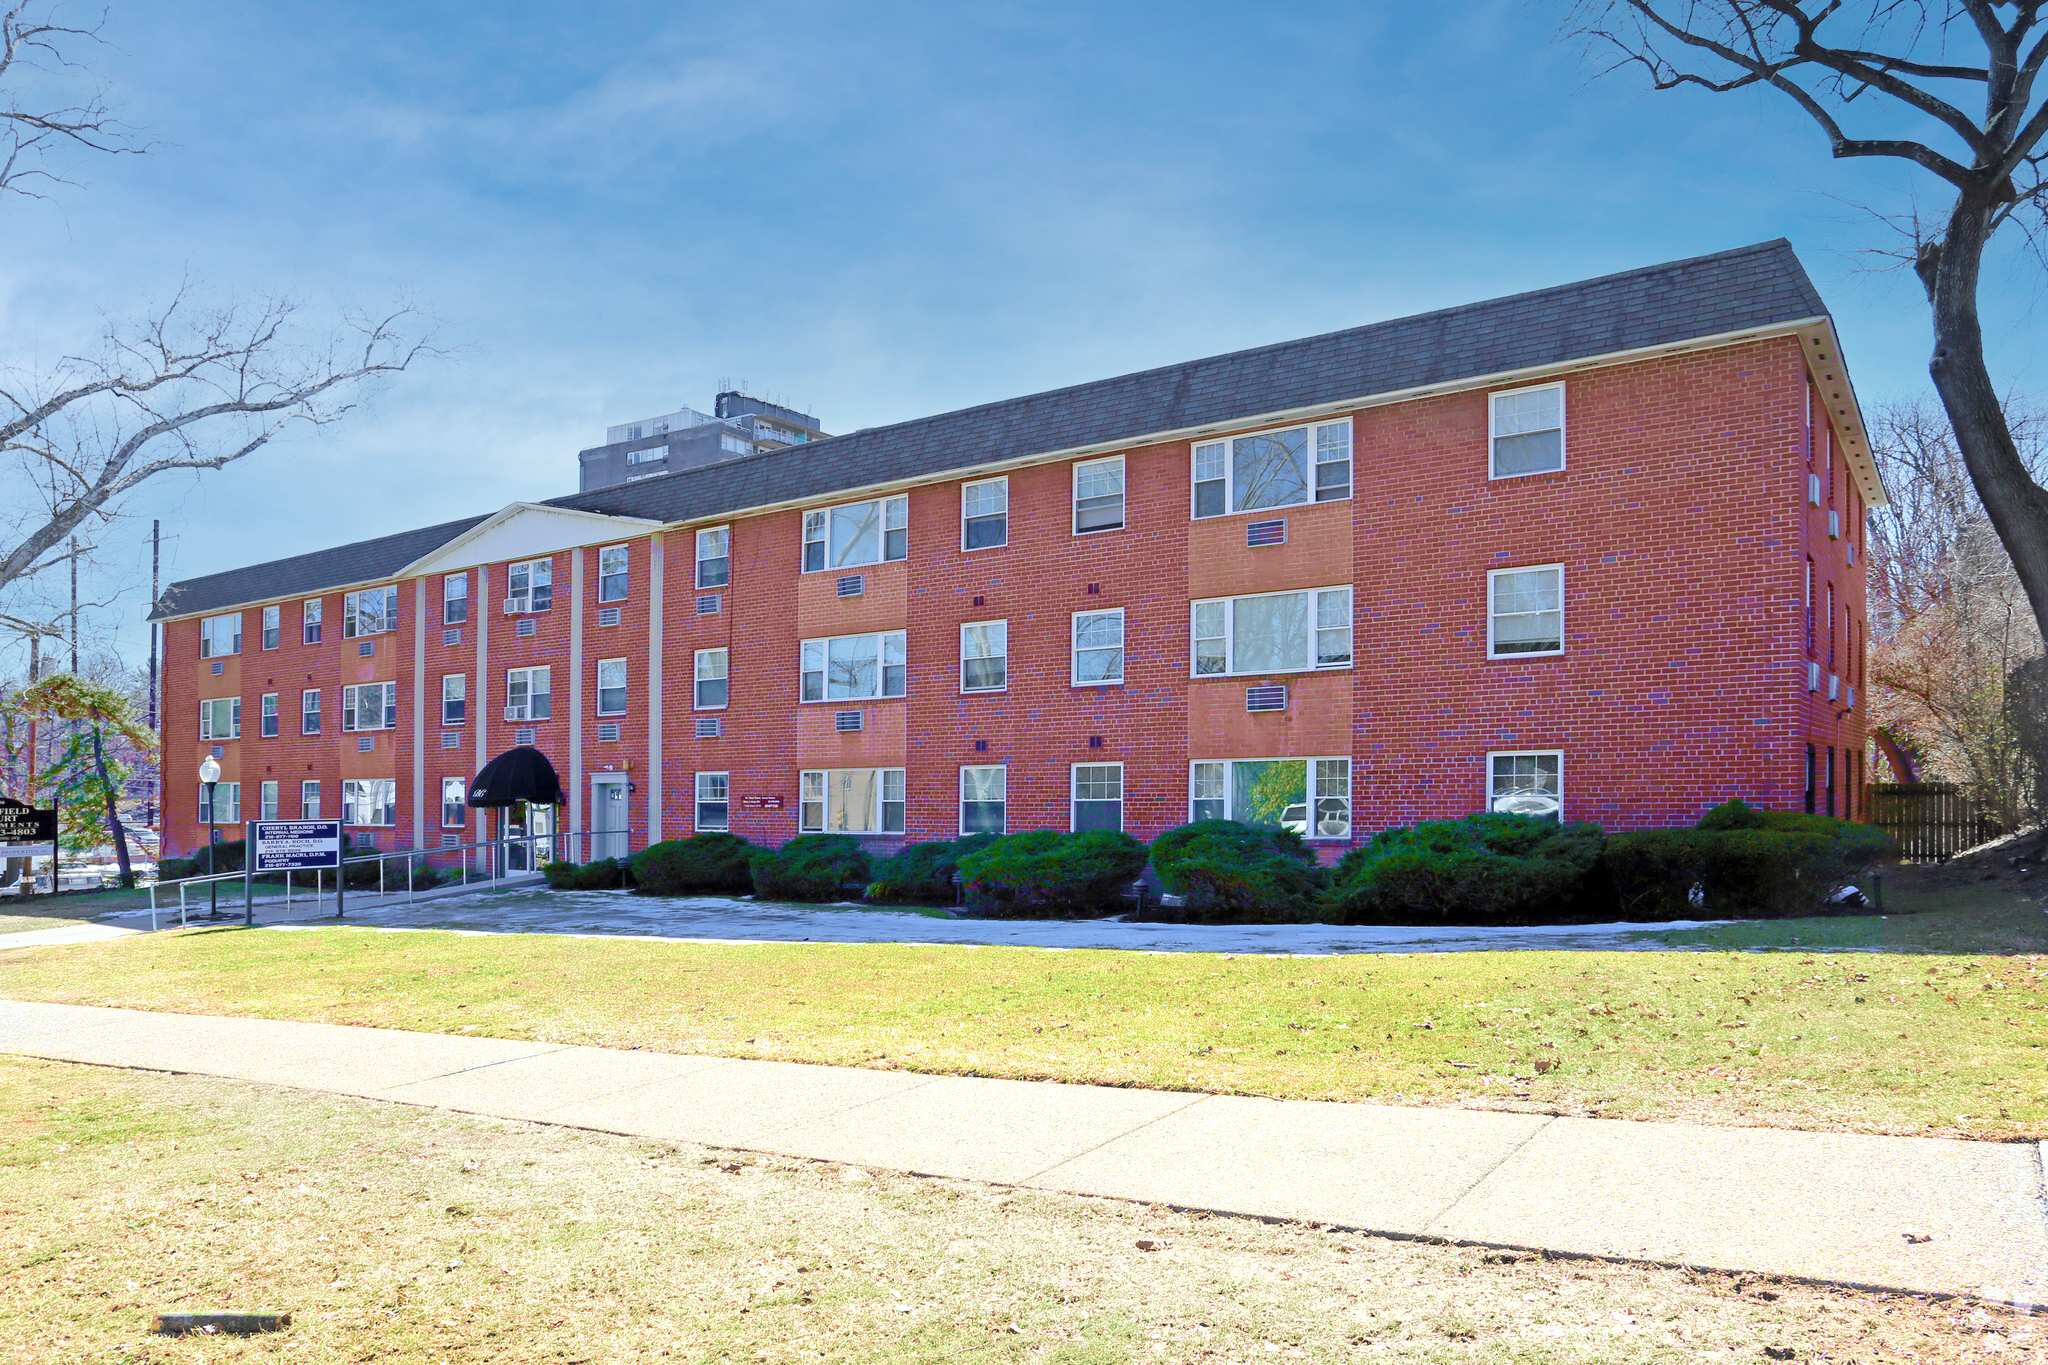 Brynfield Apartments